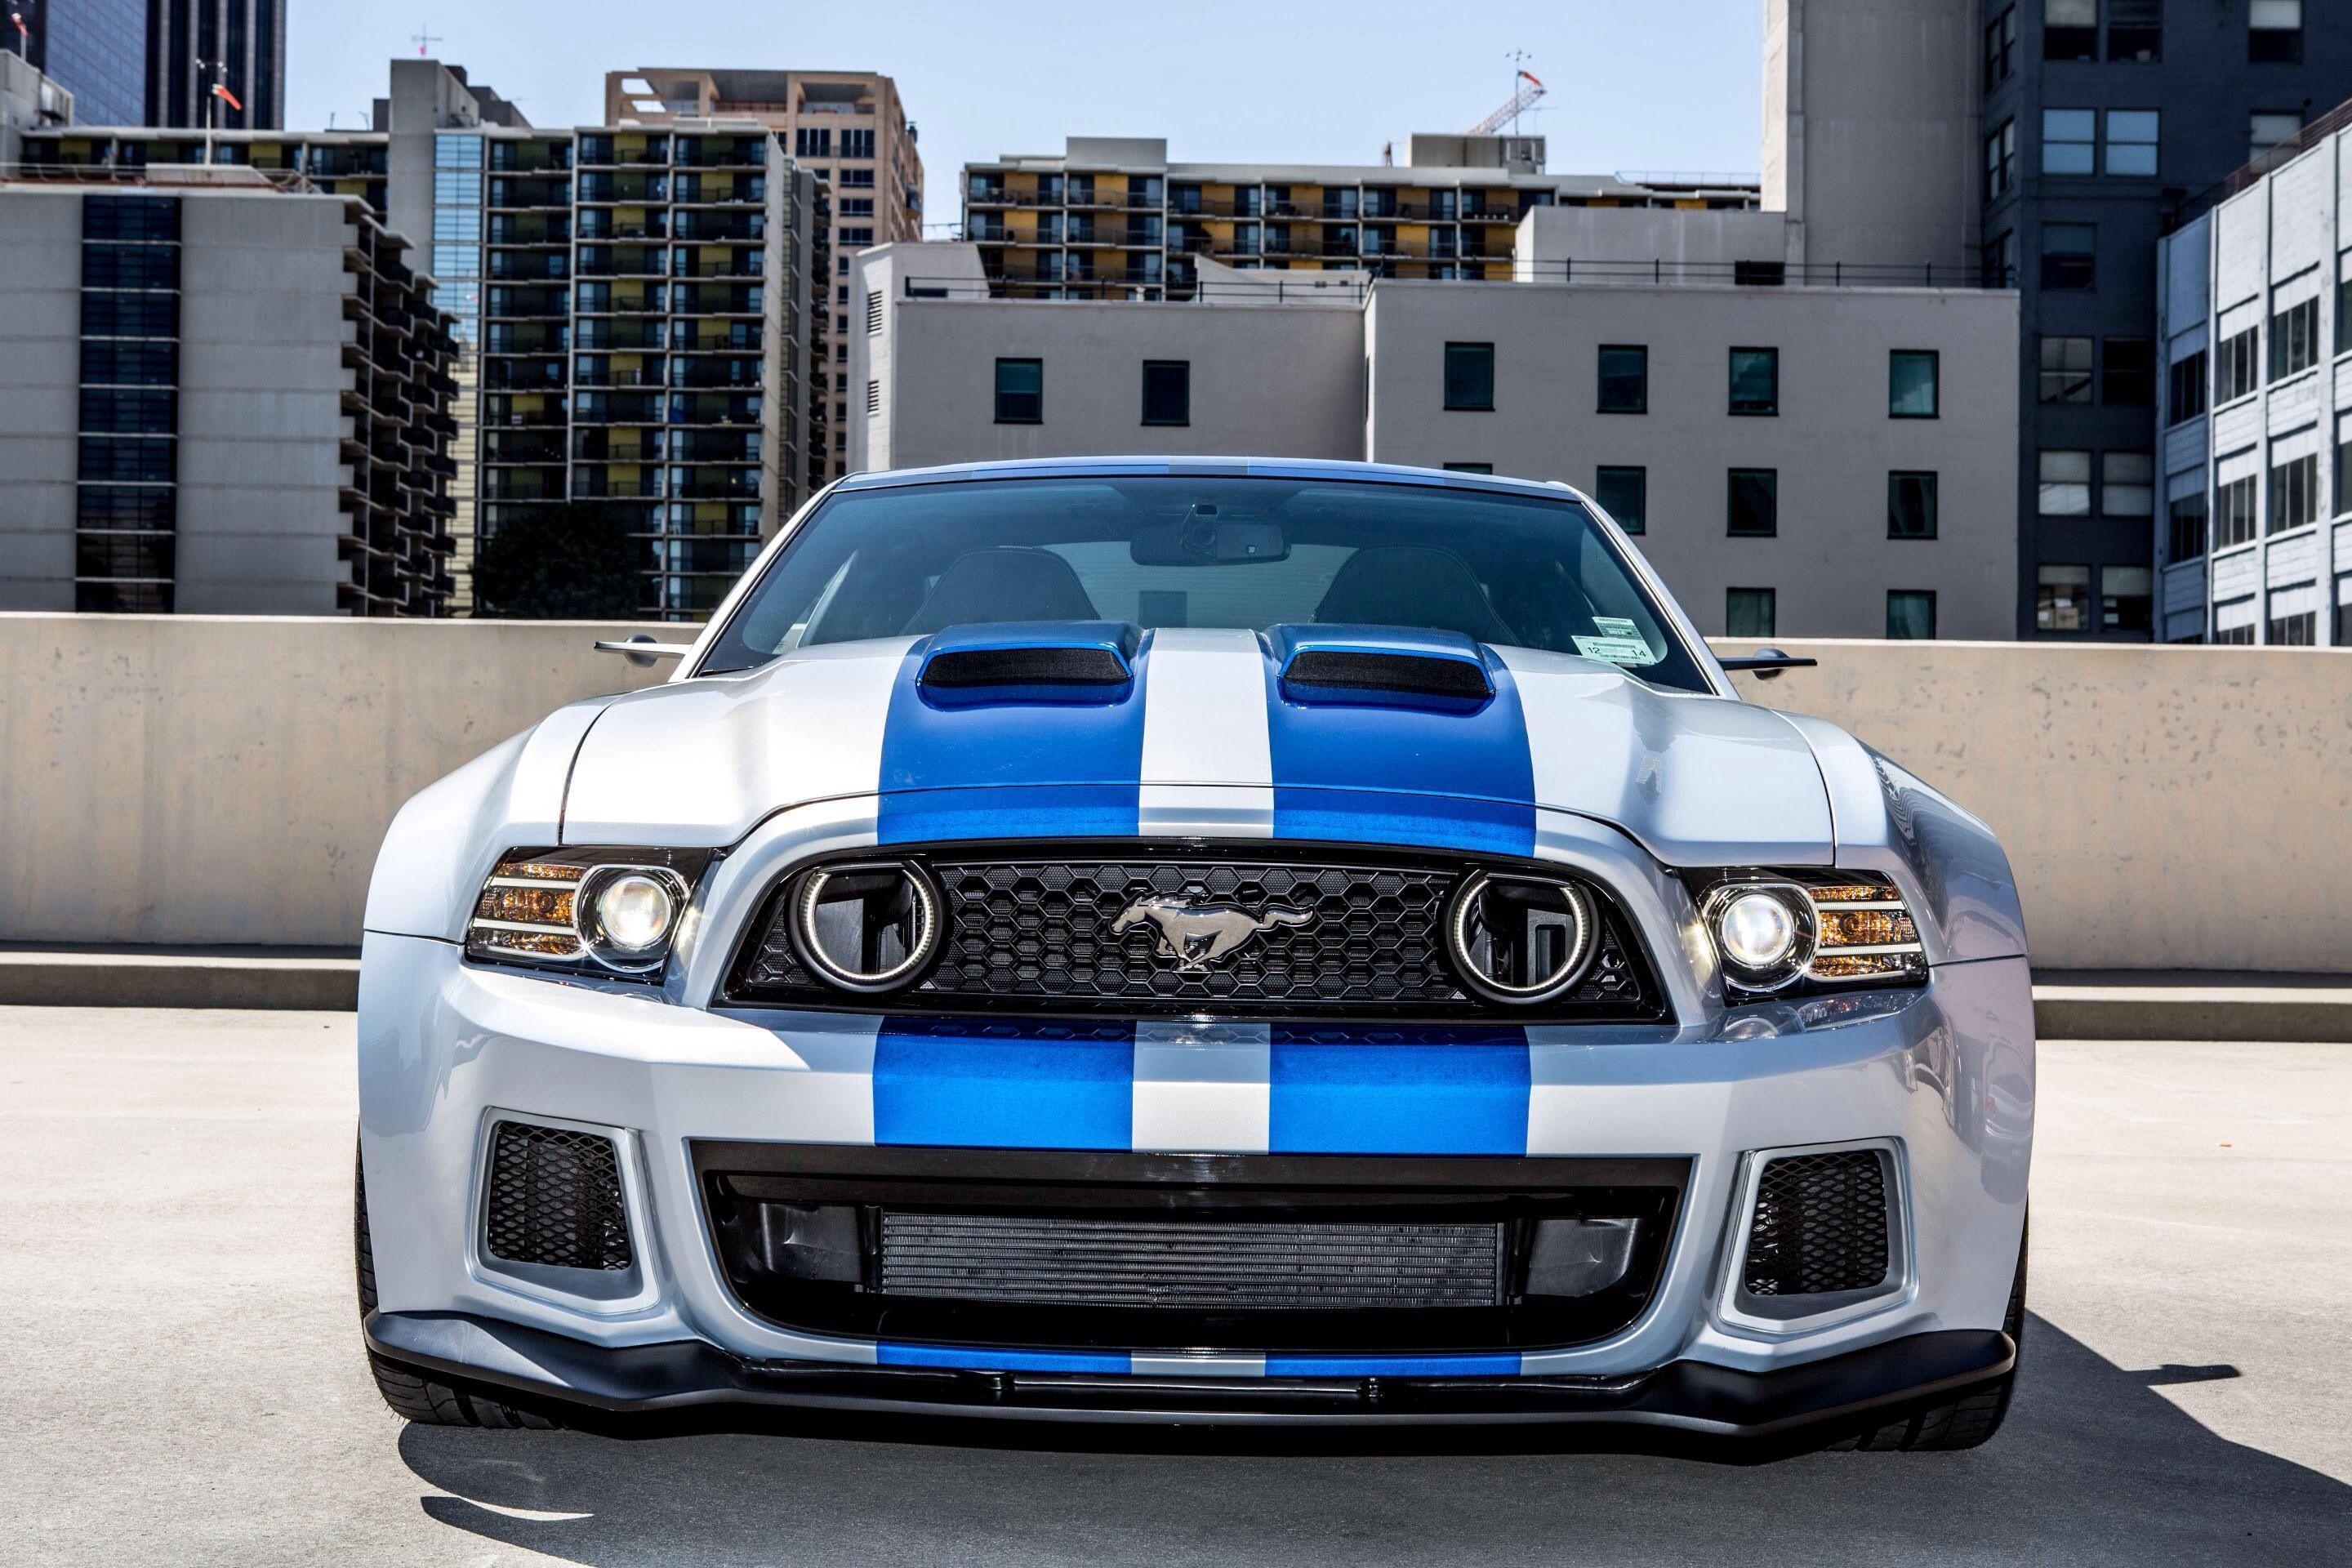 Video: New Need For Speed Commercial Features 2015 Mustang